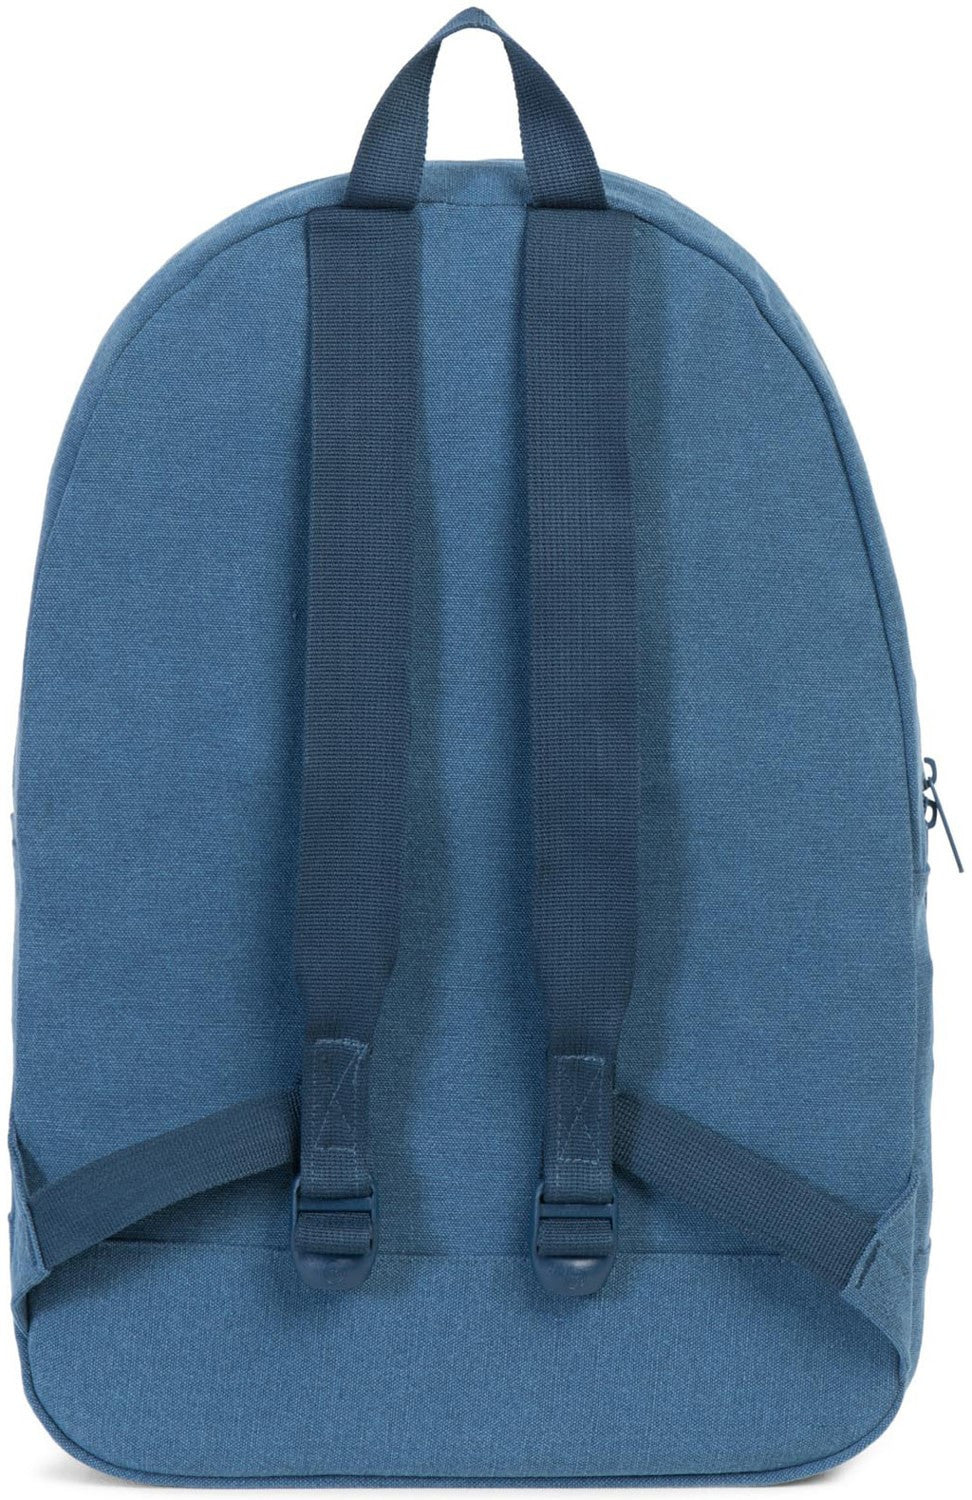 Herschel Supply Co. - Packable Daypack, Navy Canvas - The Giant Peach